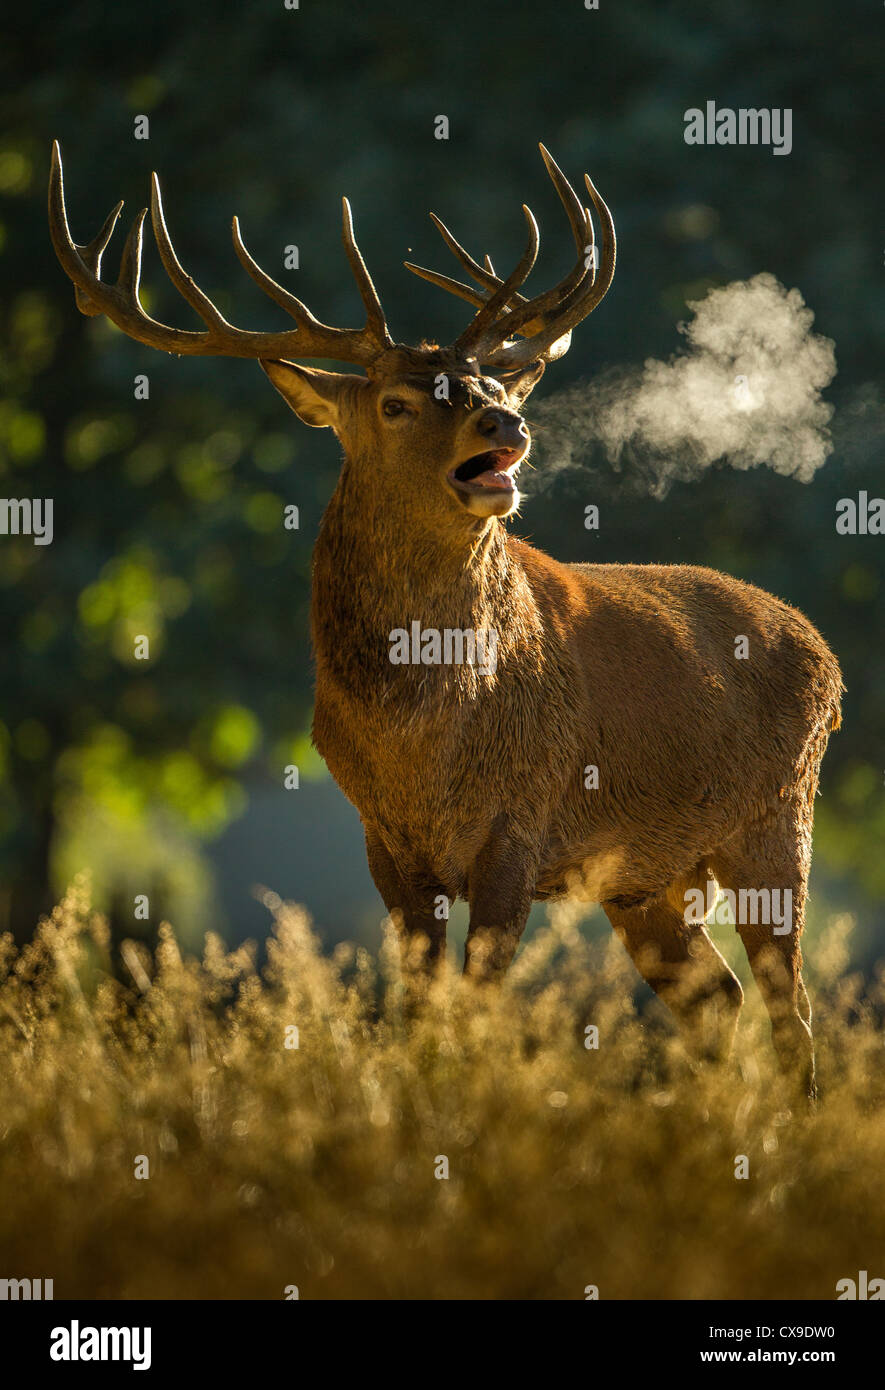 Red deer stag roaring loudy during the autumn rutting season where males compete for the attentions of females for mating rights Stock Photo